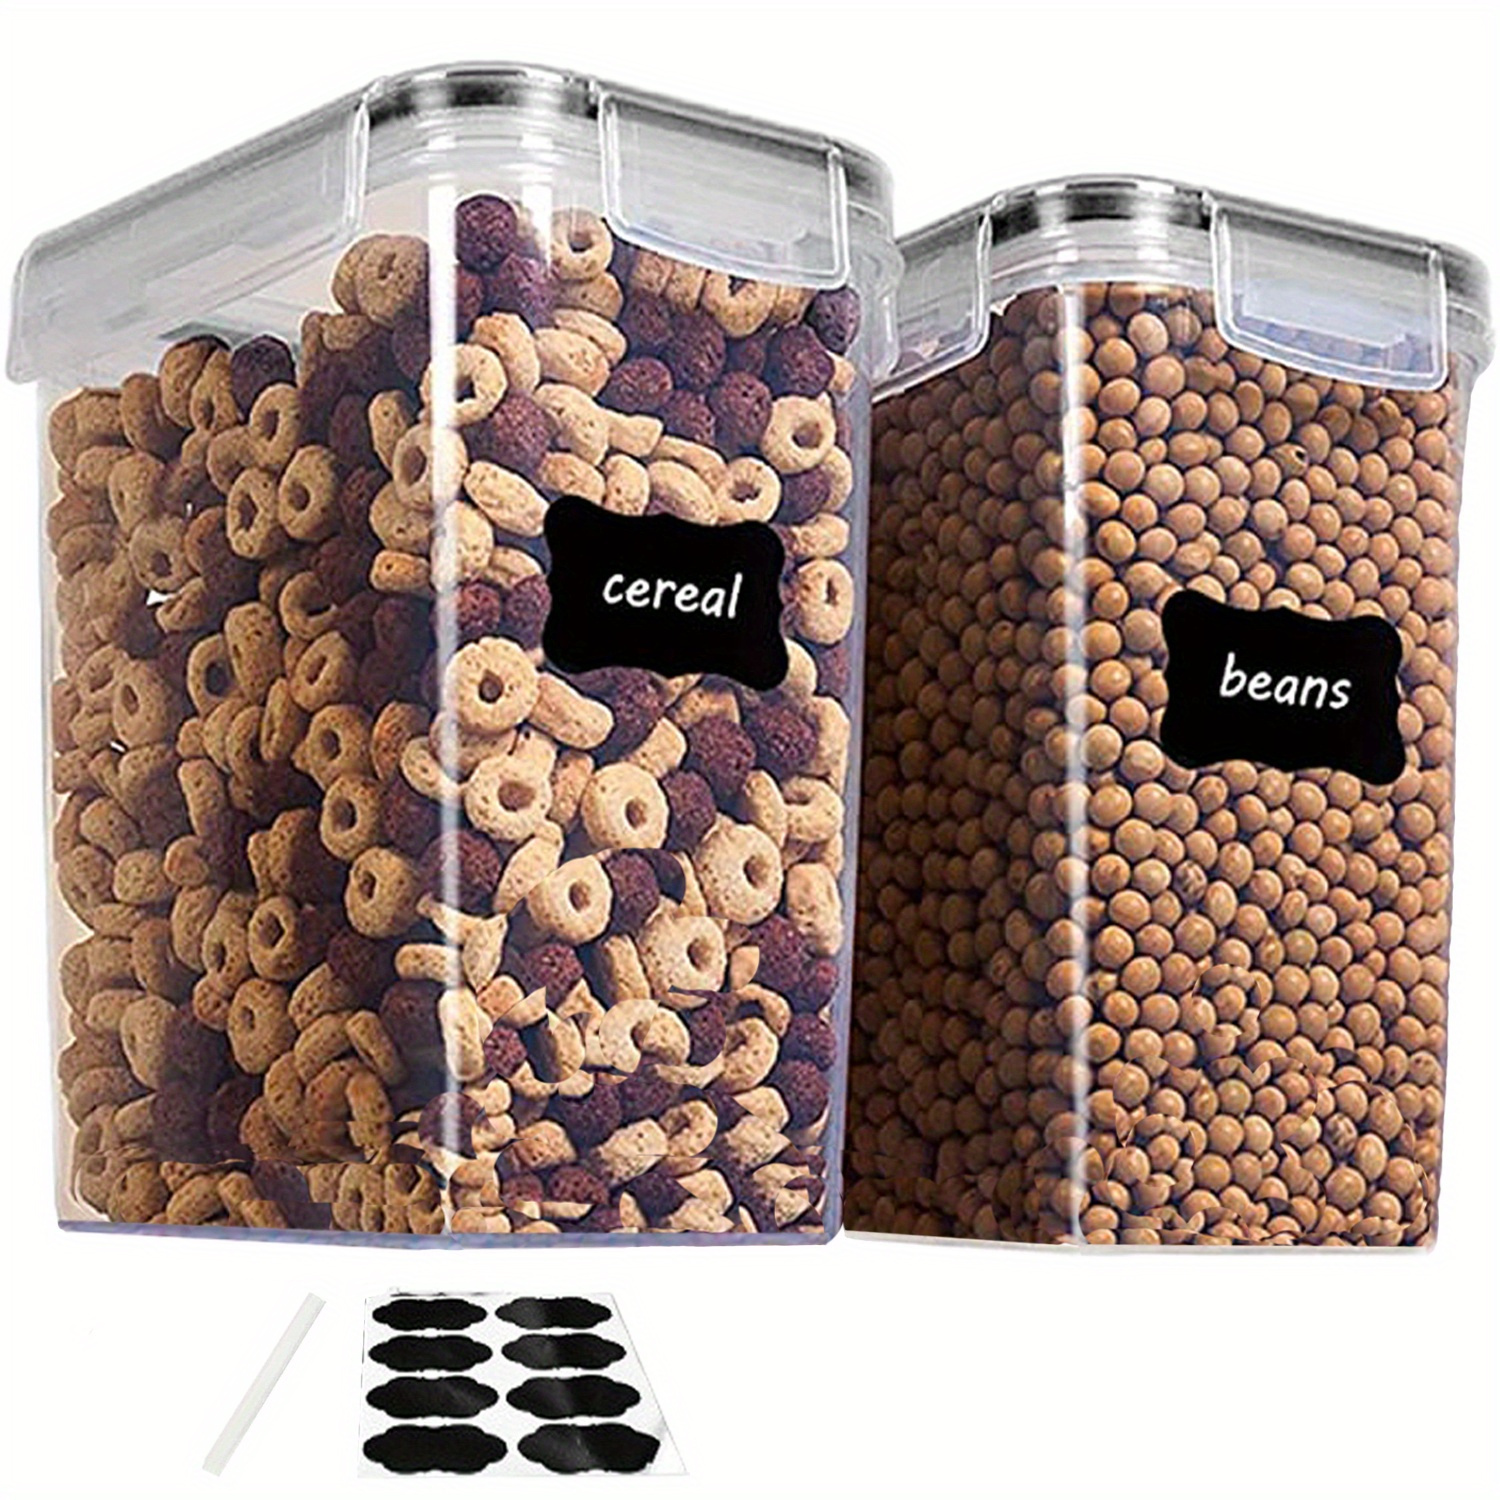 What Material Is Best for Food Storage Containers?